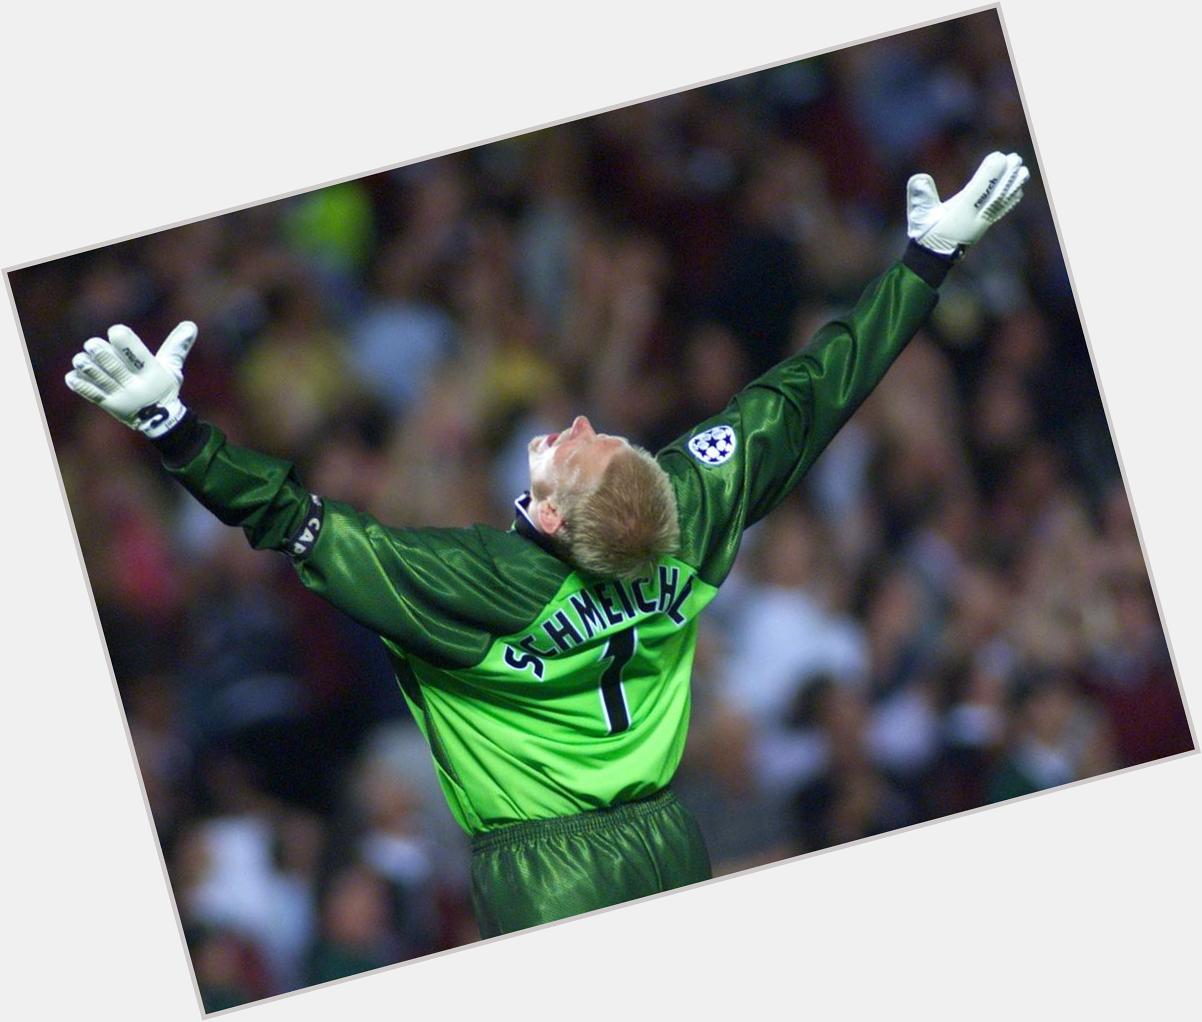 Happy birthday to Peter Schmeichel. The Manchester United legend turns 51 today. 